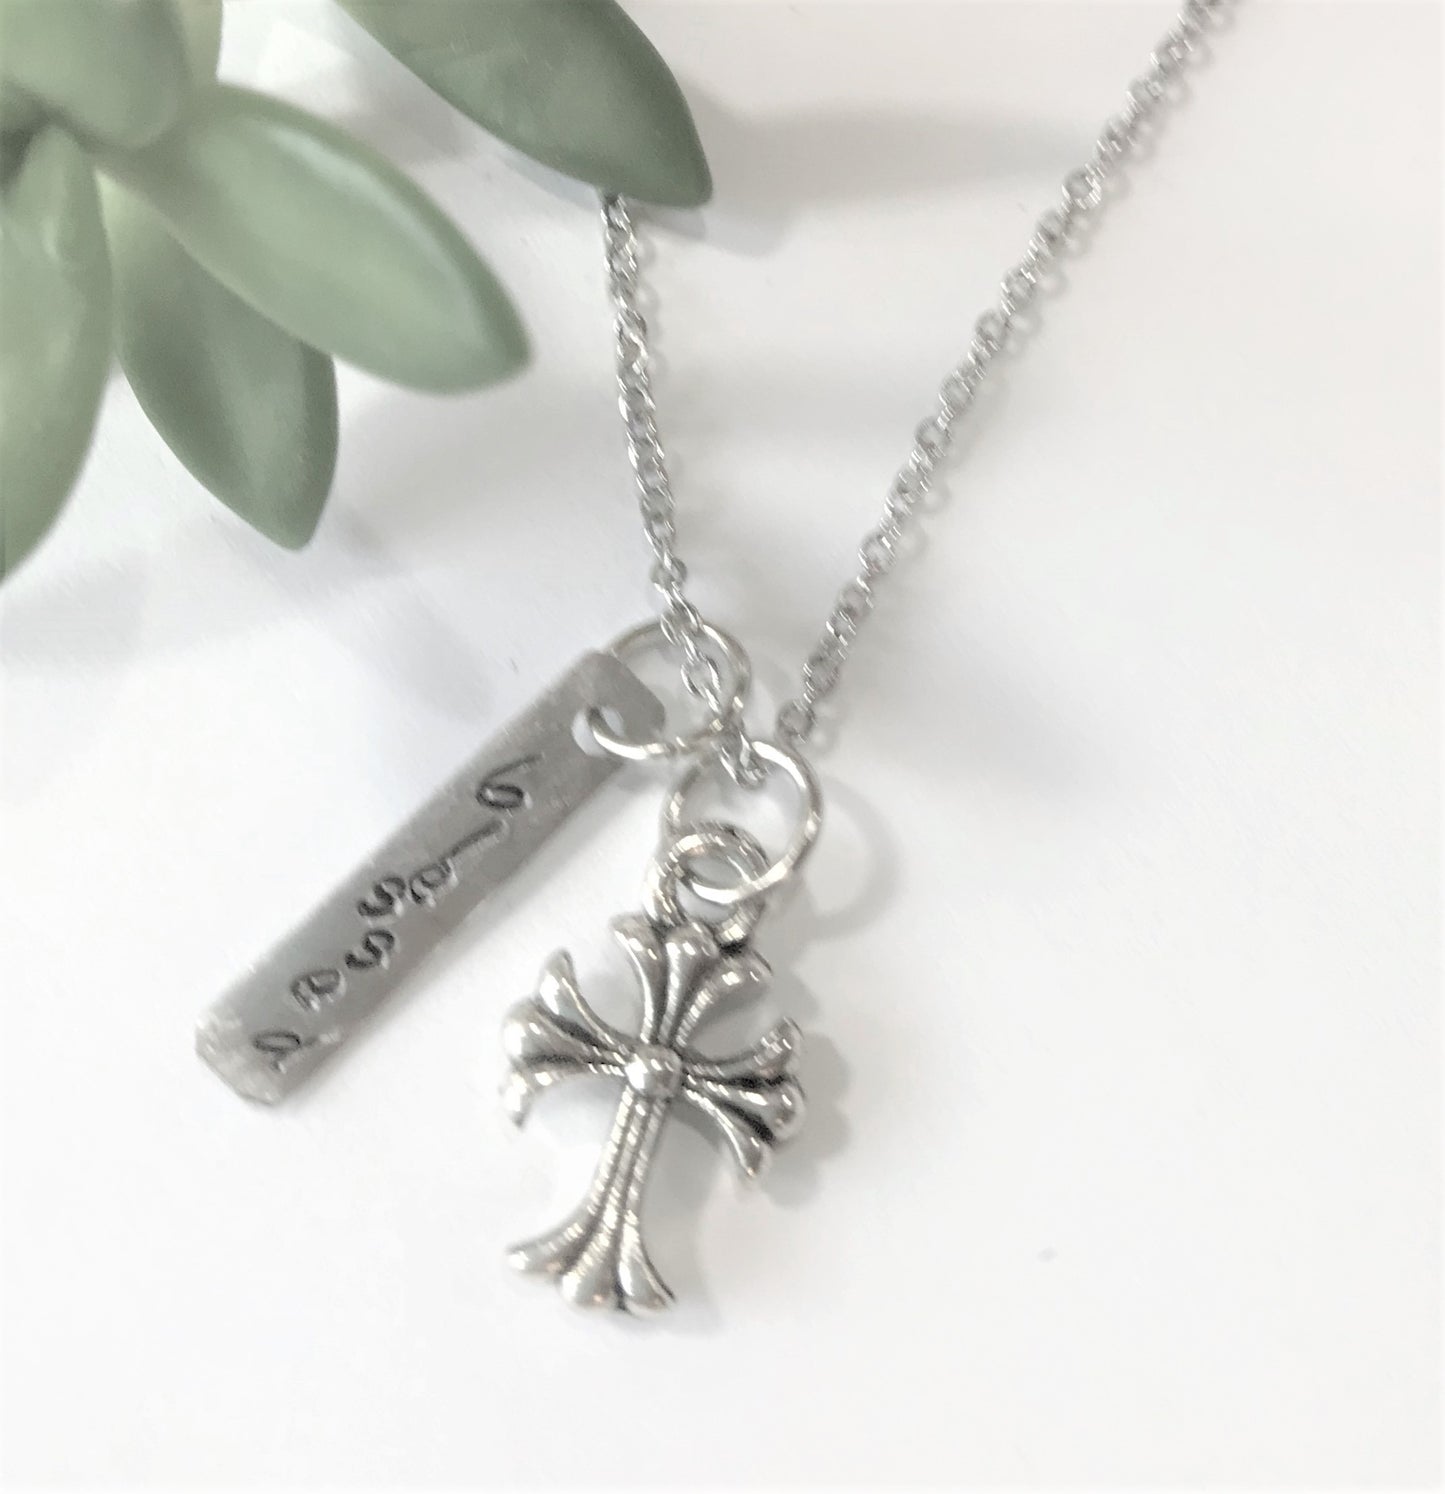 Blessed Cross Charm Necklace Hand Stamped